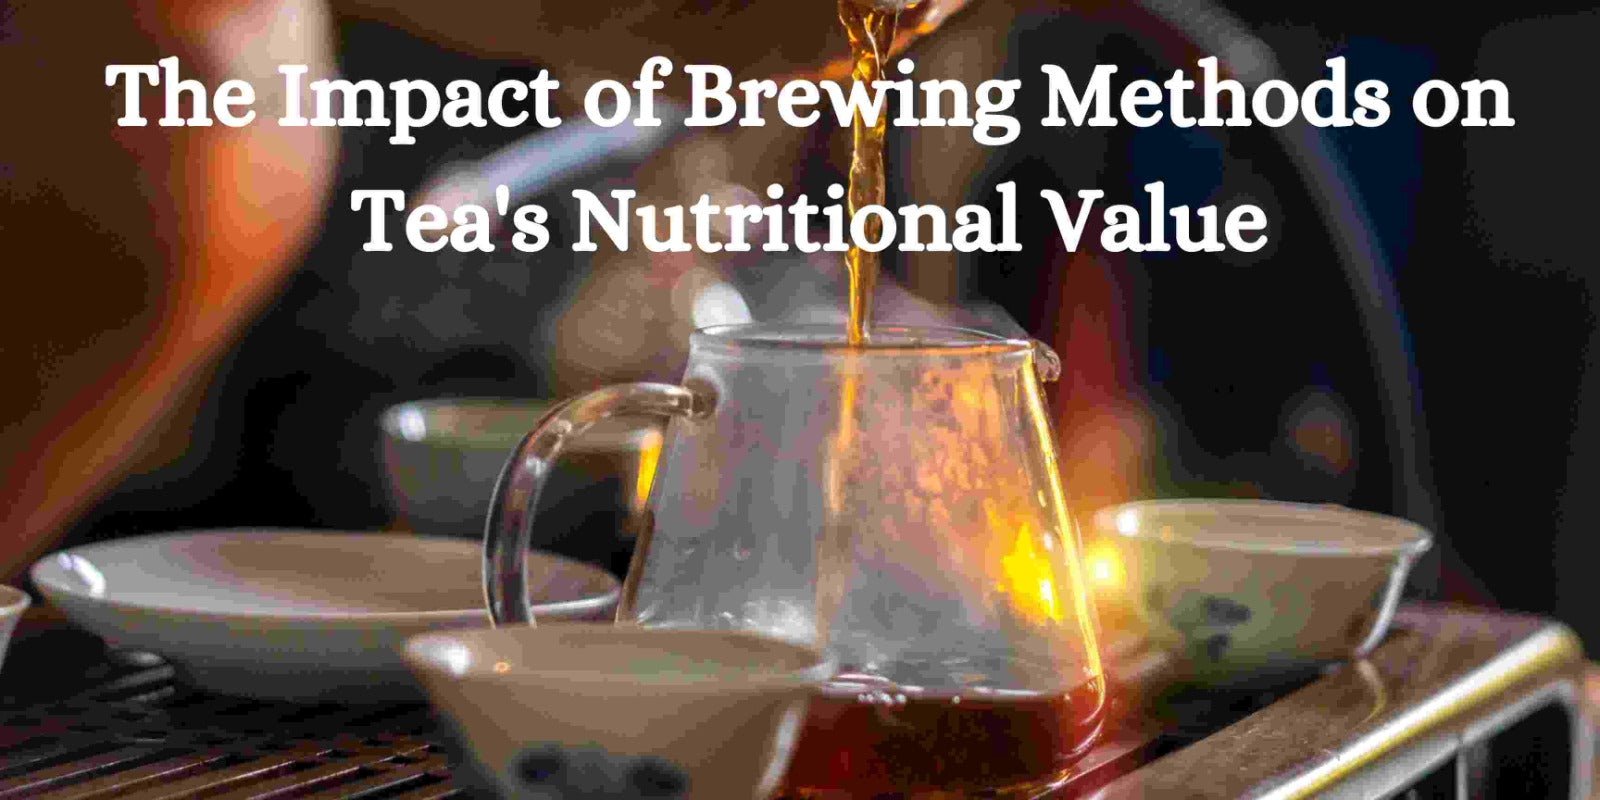 The Impact of Brewing Methods on Tea's Nutritional Value